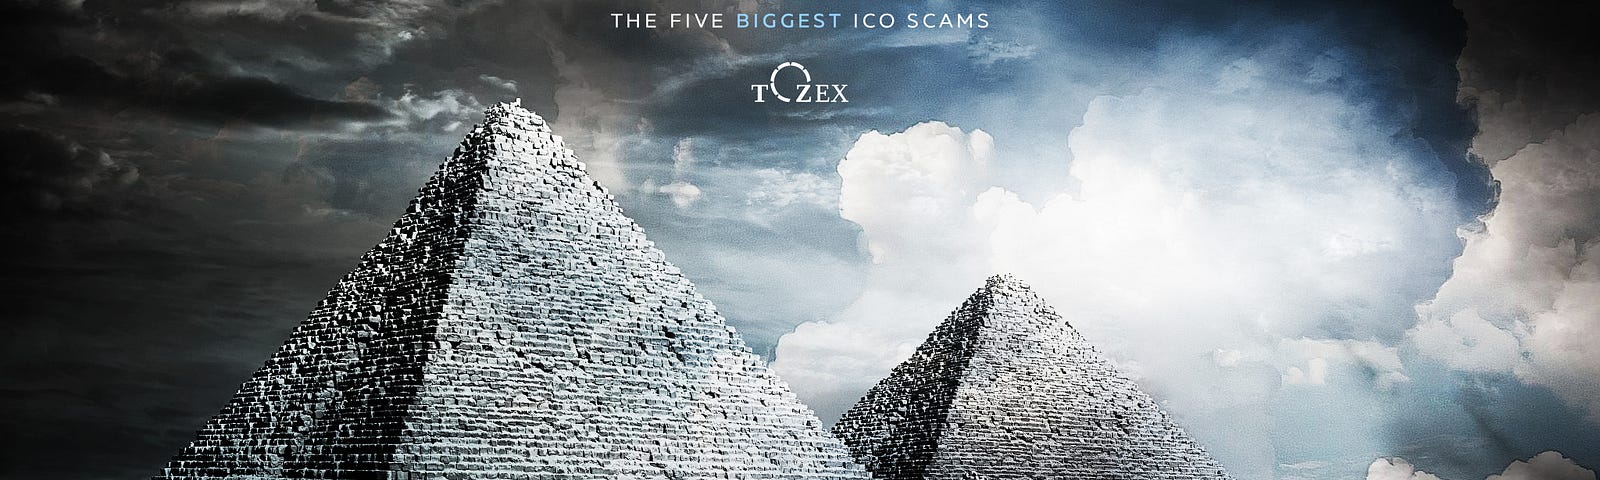 The Five Biggest ICO Scams